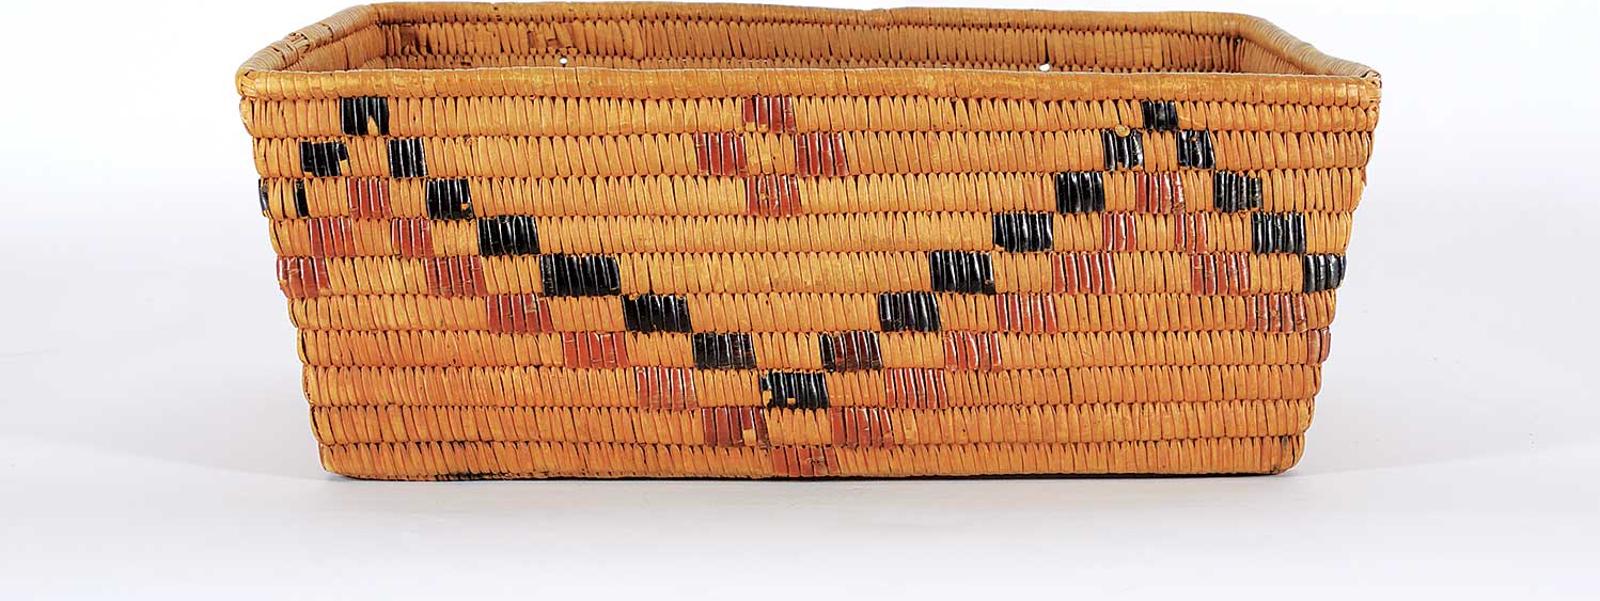 Northwest Coast First Nations School - Rectangular Basket with Black and Brown Checker Pattern